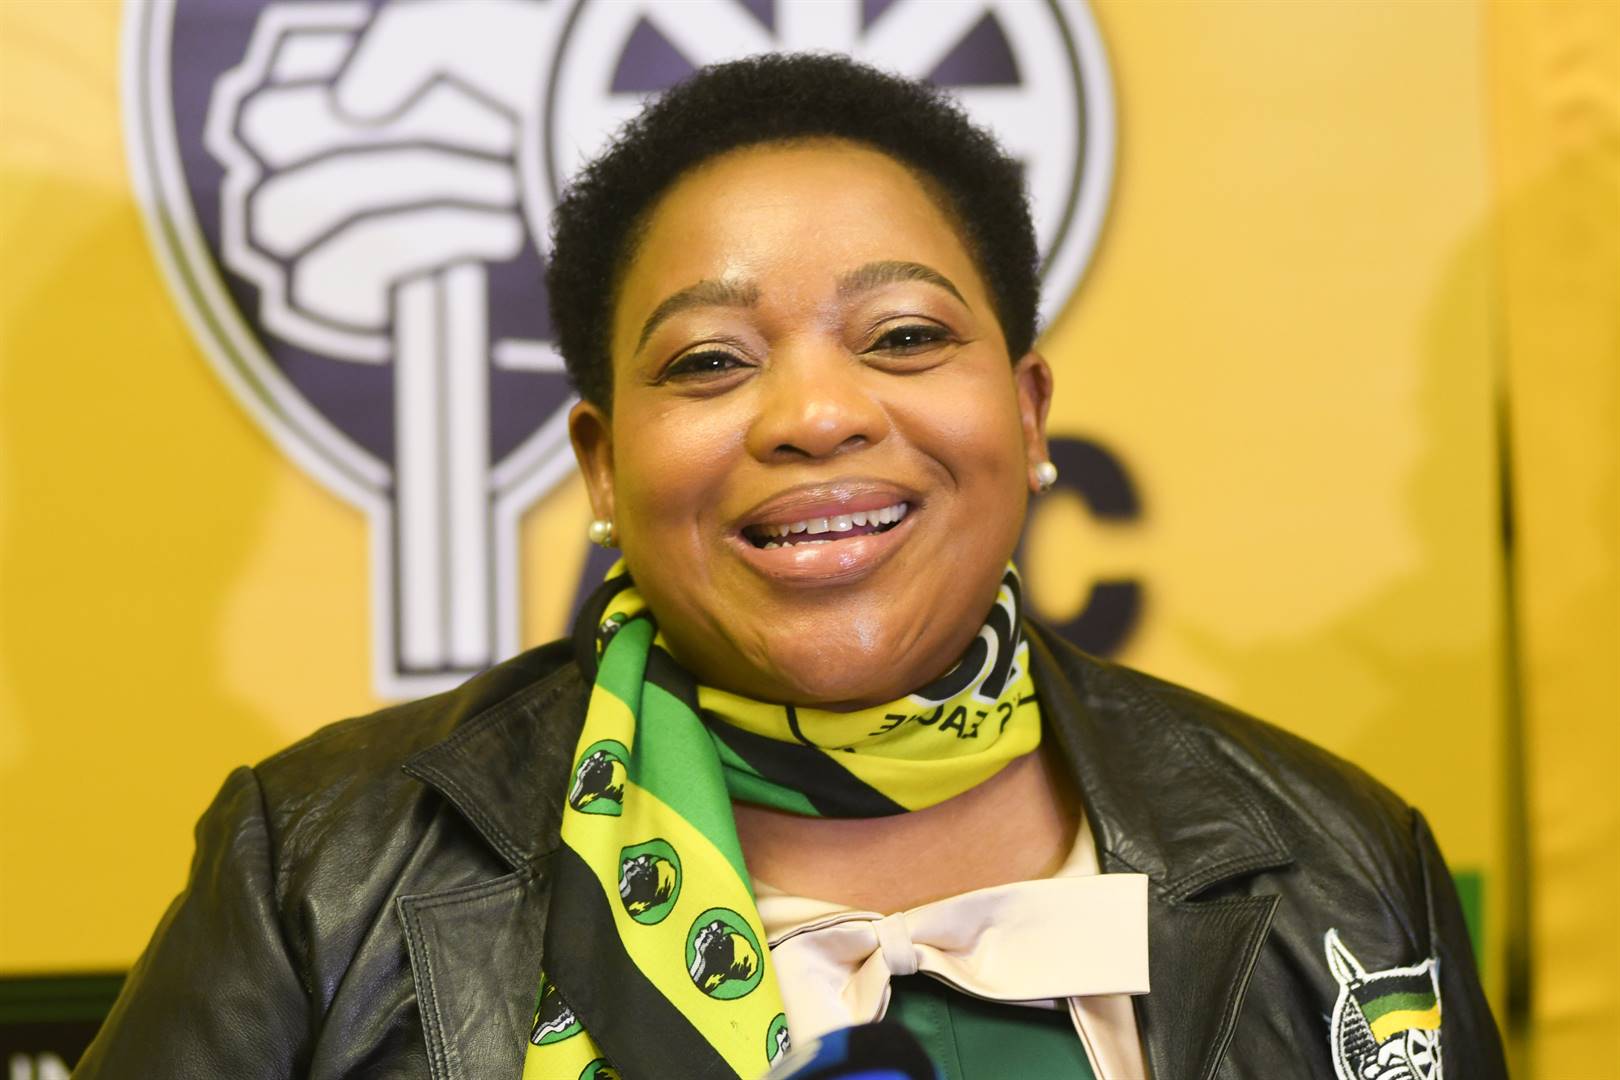 Nomusa Dube-Ncube, the incoming KZN Premier will be sworn in later this month after the resignation of former Premier Sihle Zikalala following his defeat at the ANC KwaZulu-Natal elective conference.PHOTO: Gallo Images/Darren Stewart